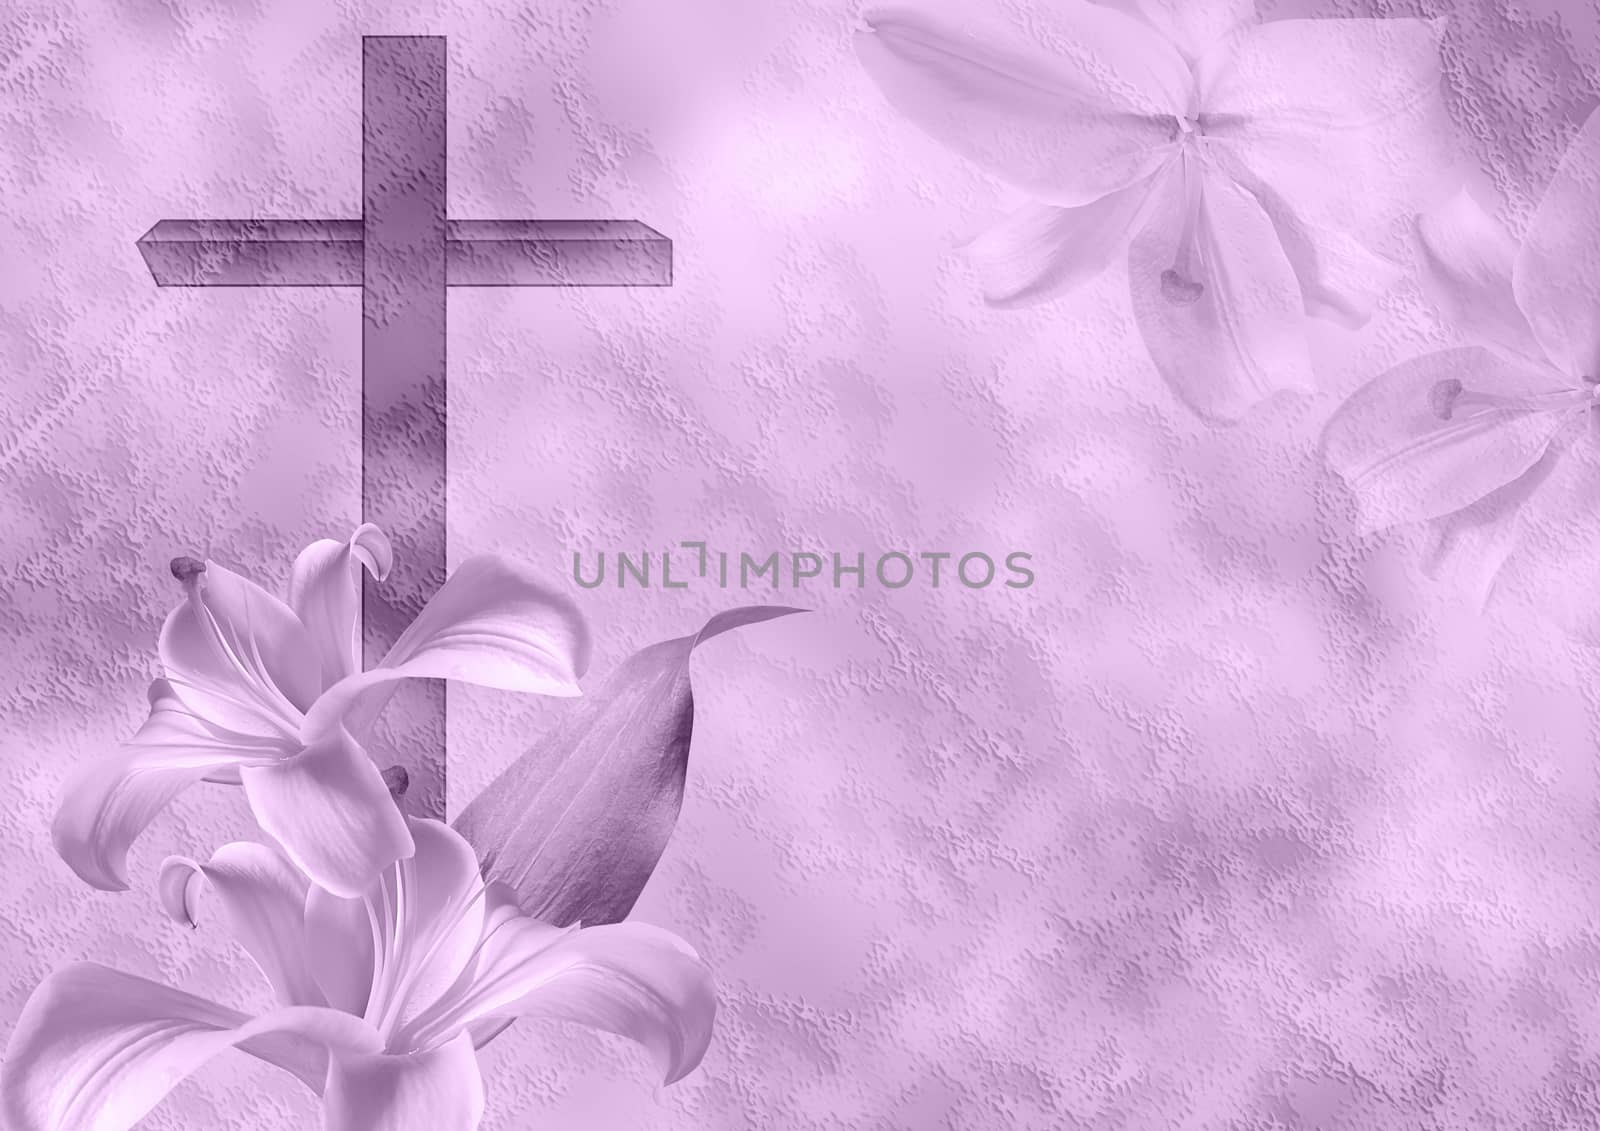 Christian cross and lily flower by grace21